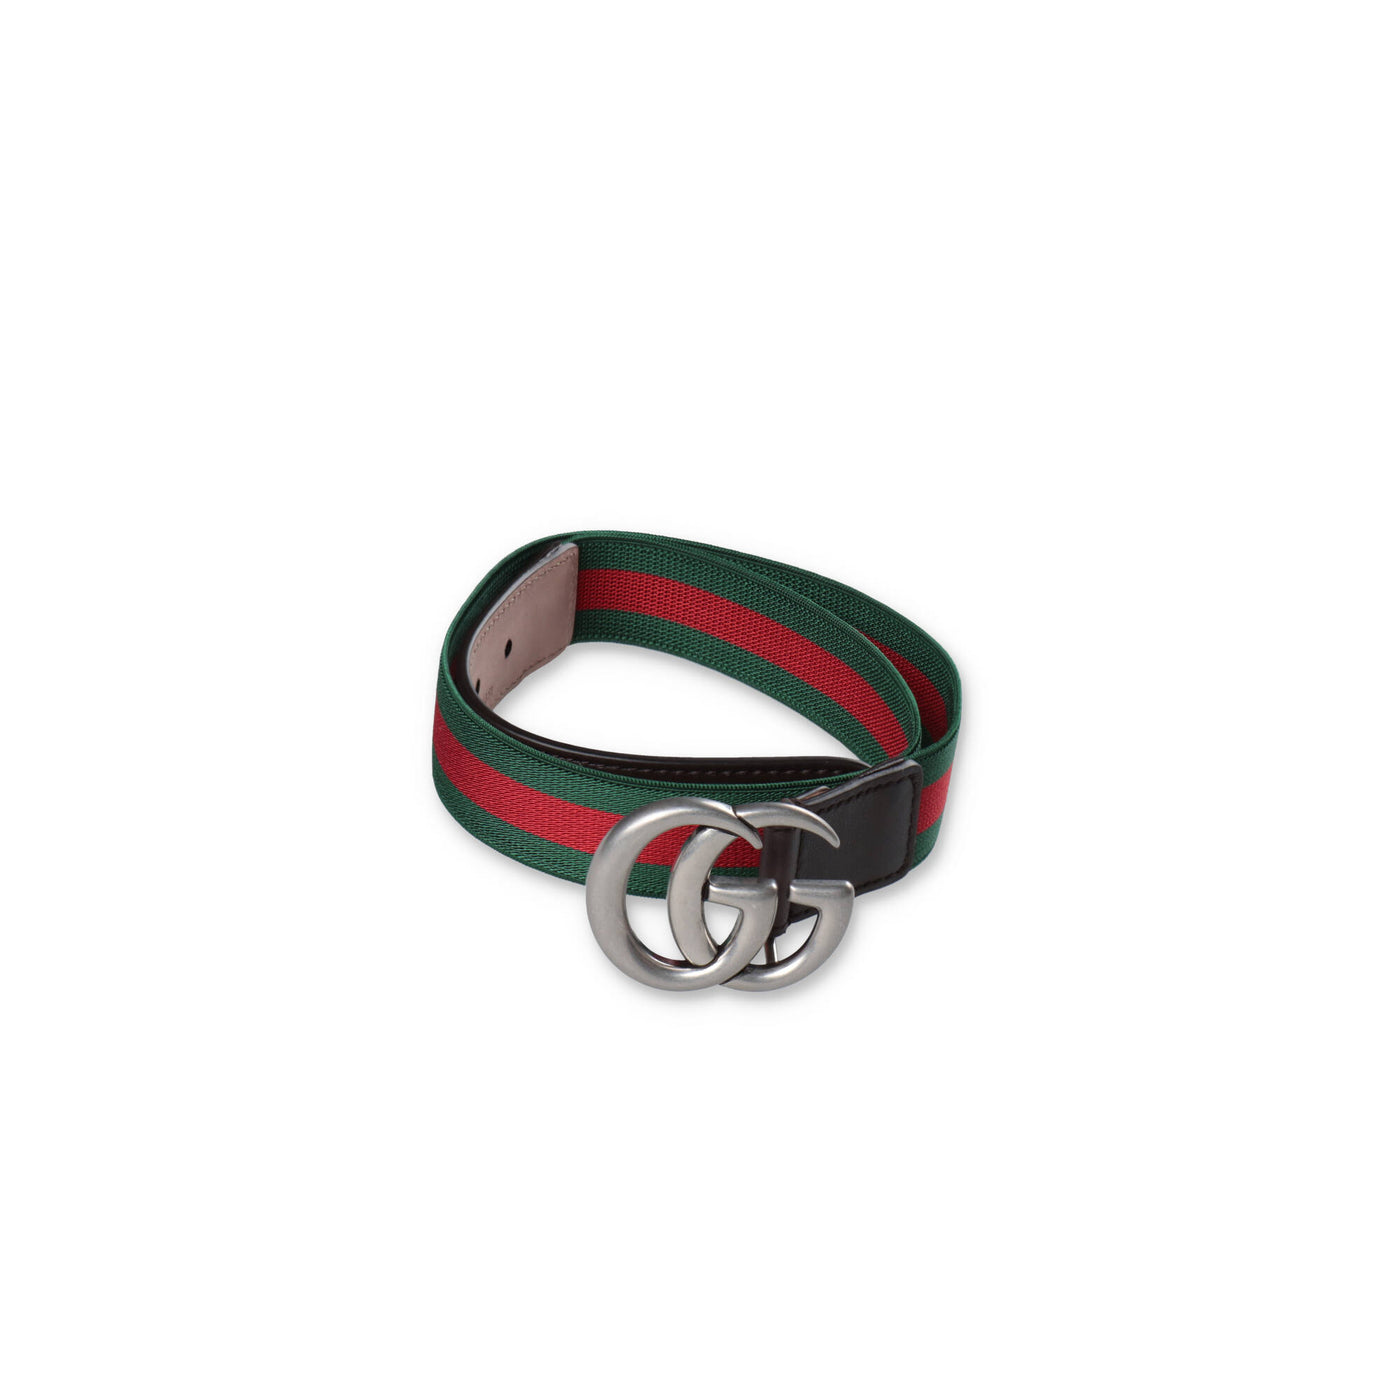 Green and red elastic Web tape with leather trim boy GUCCI belt